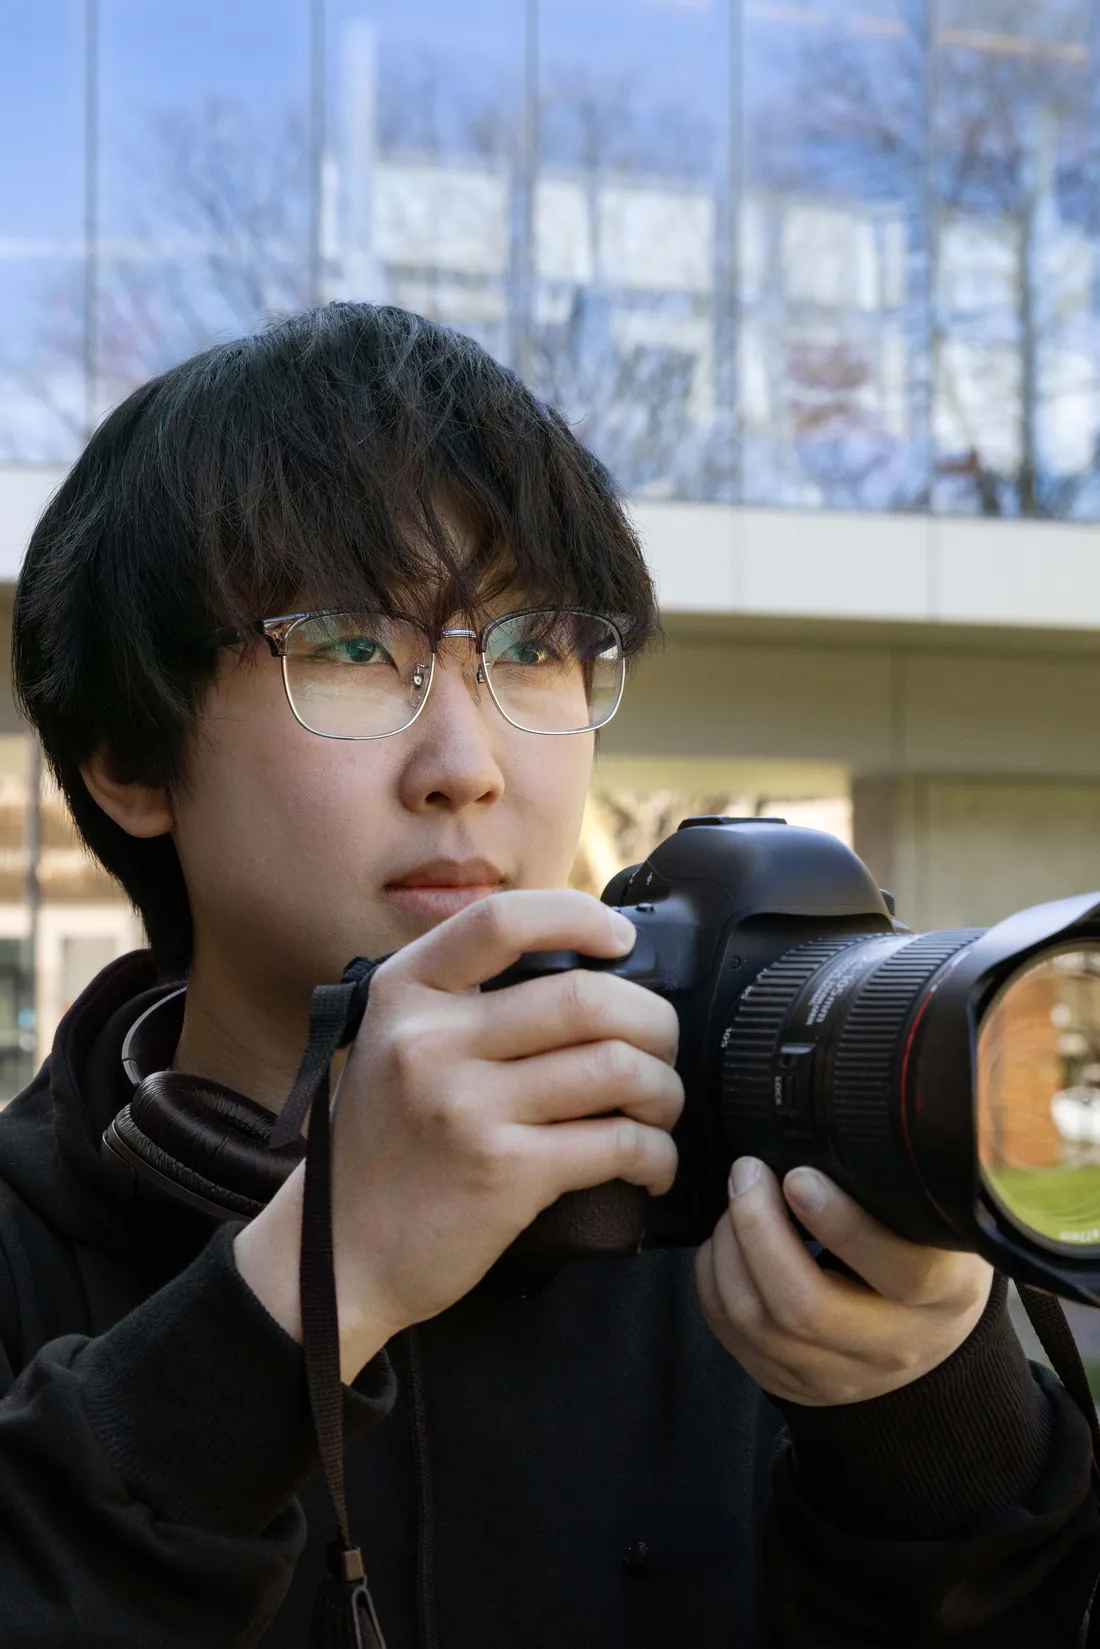 Graduate student Jiaxin Zhao looking at the photography he shot on his camera.